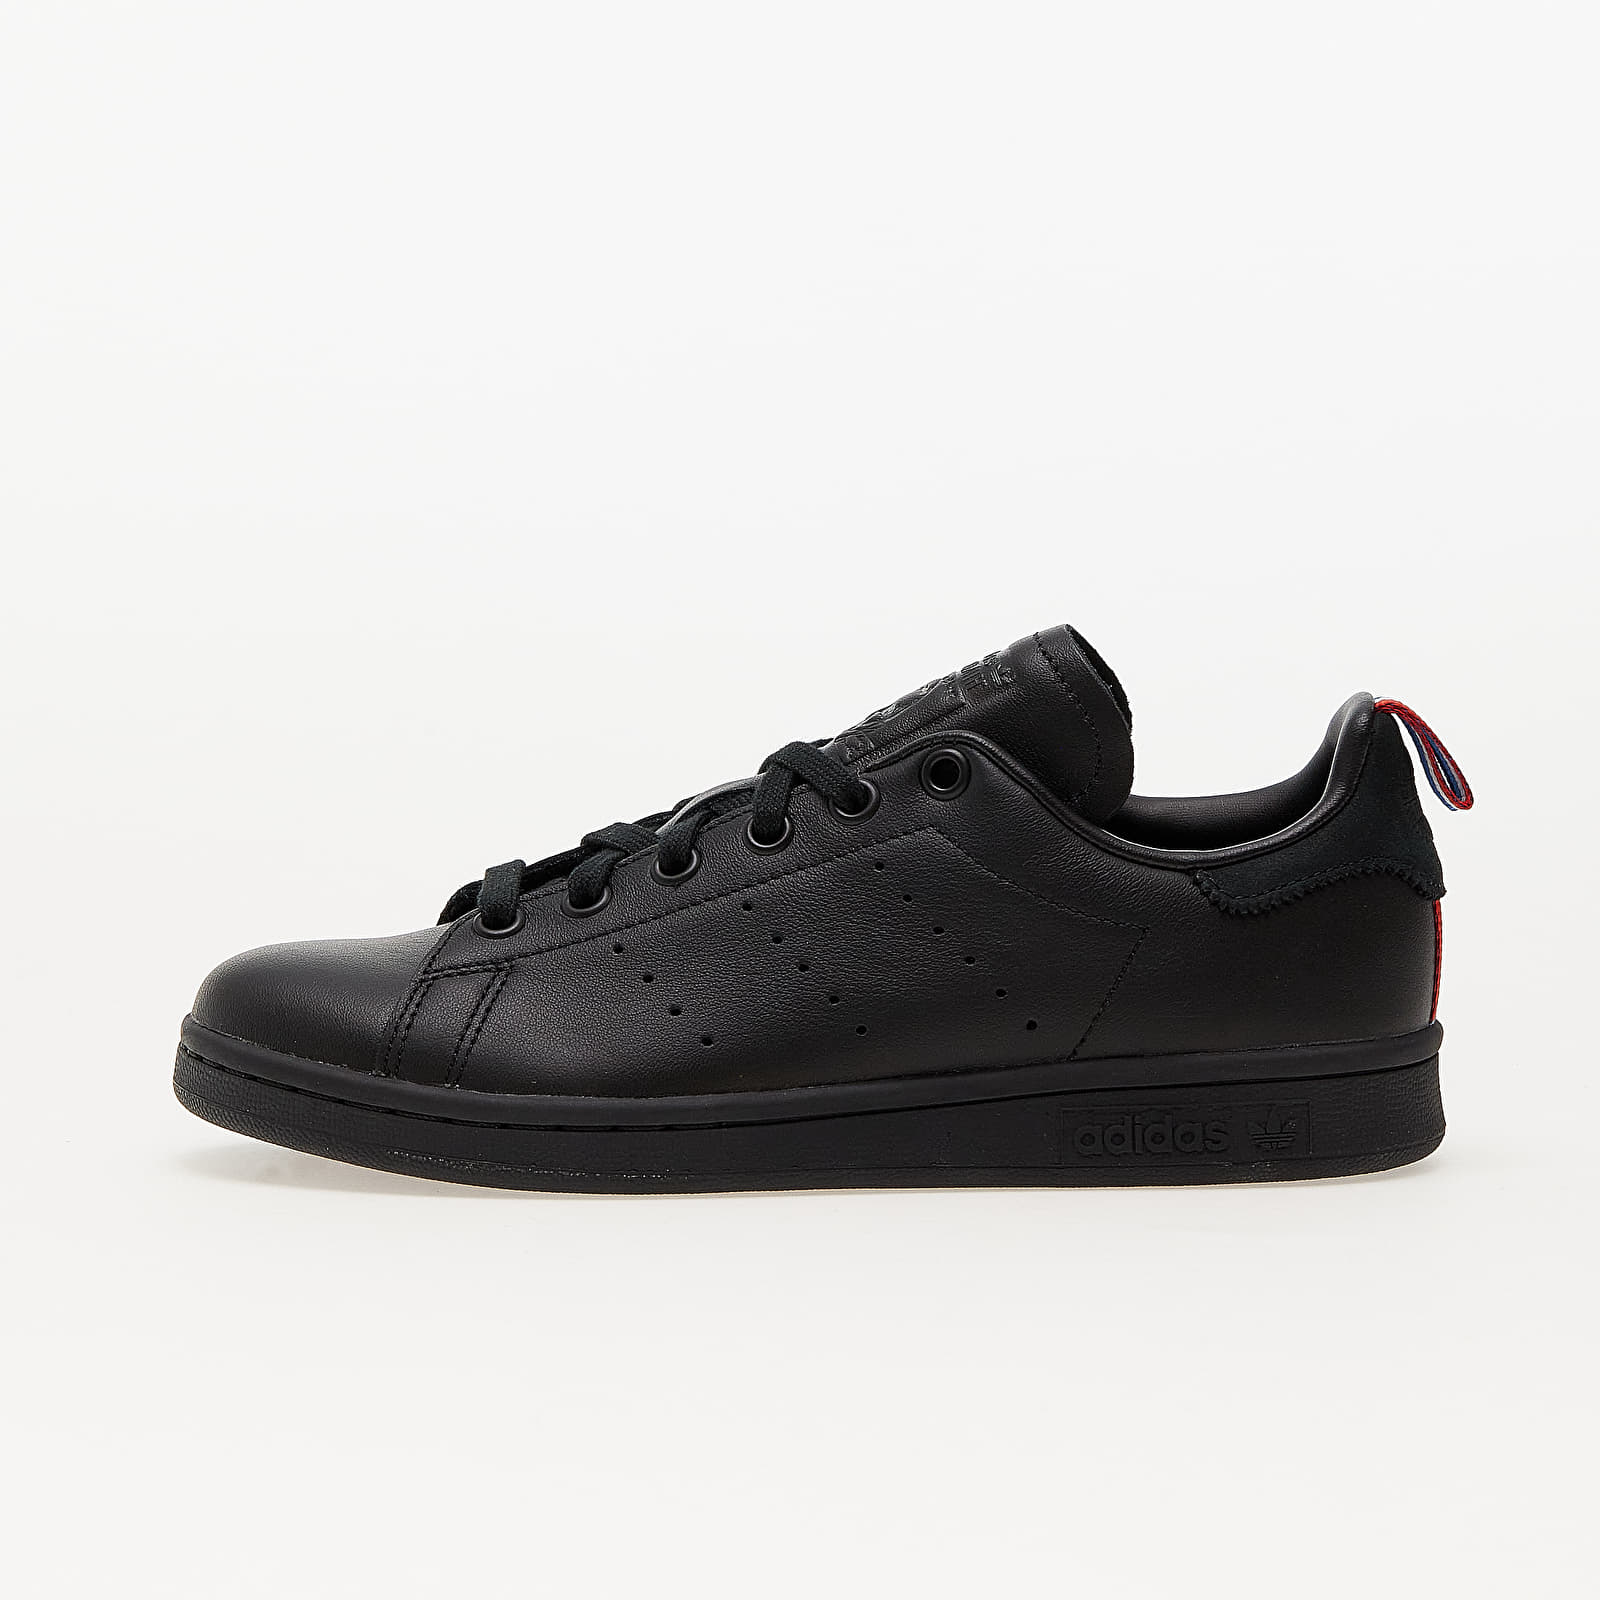 Chaussures et baskets homme adidas Stan Smith Core Black/ Ftw White/ Scarlet